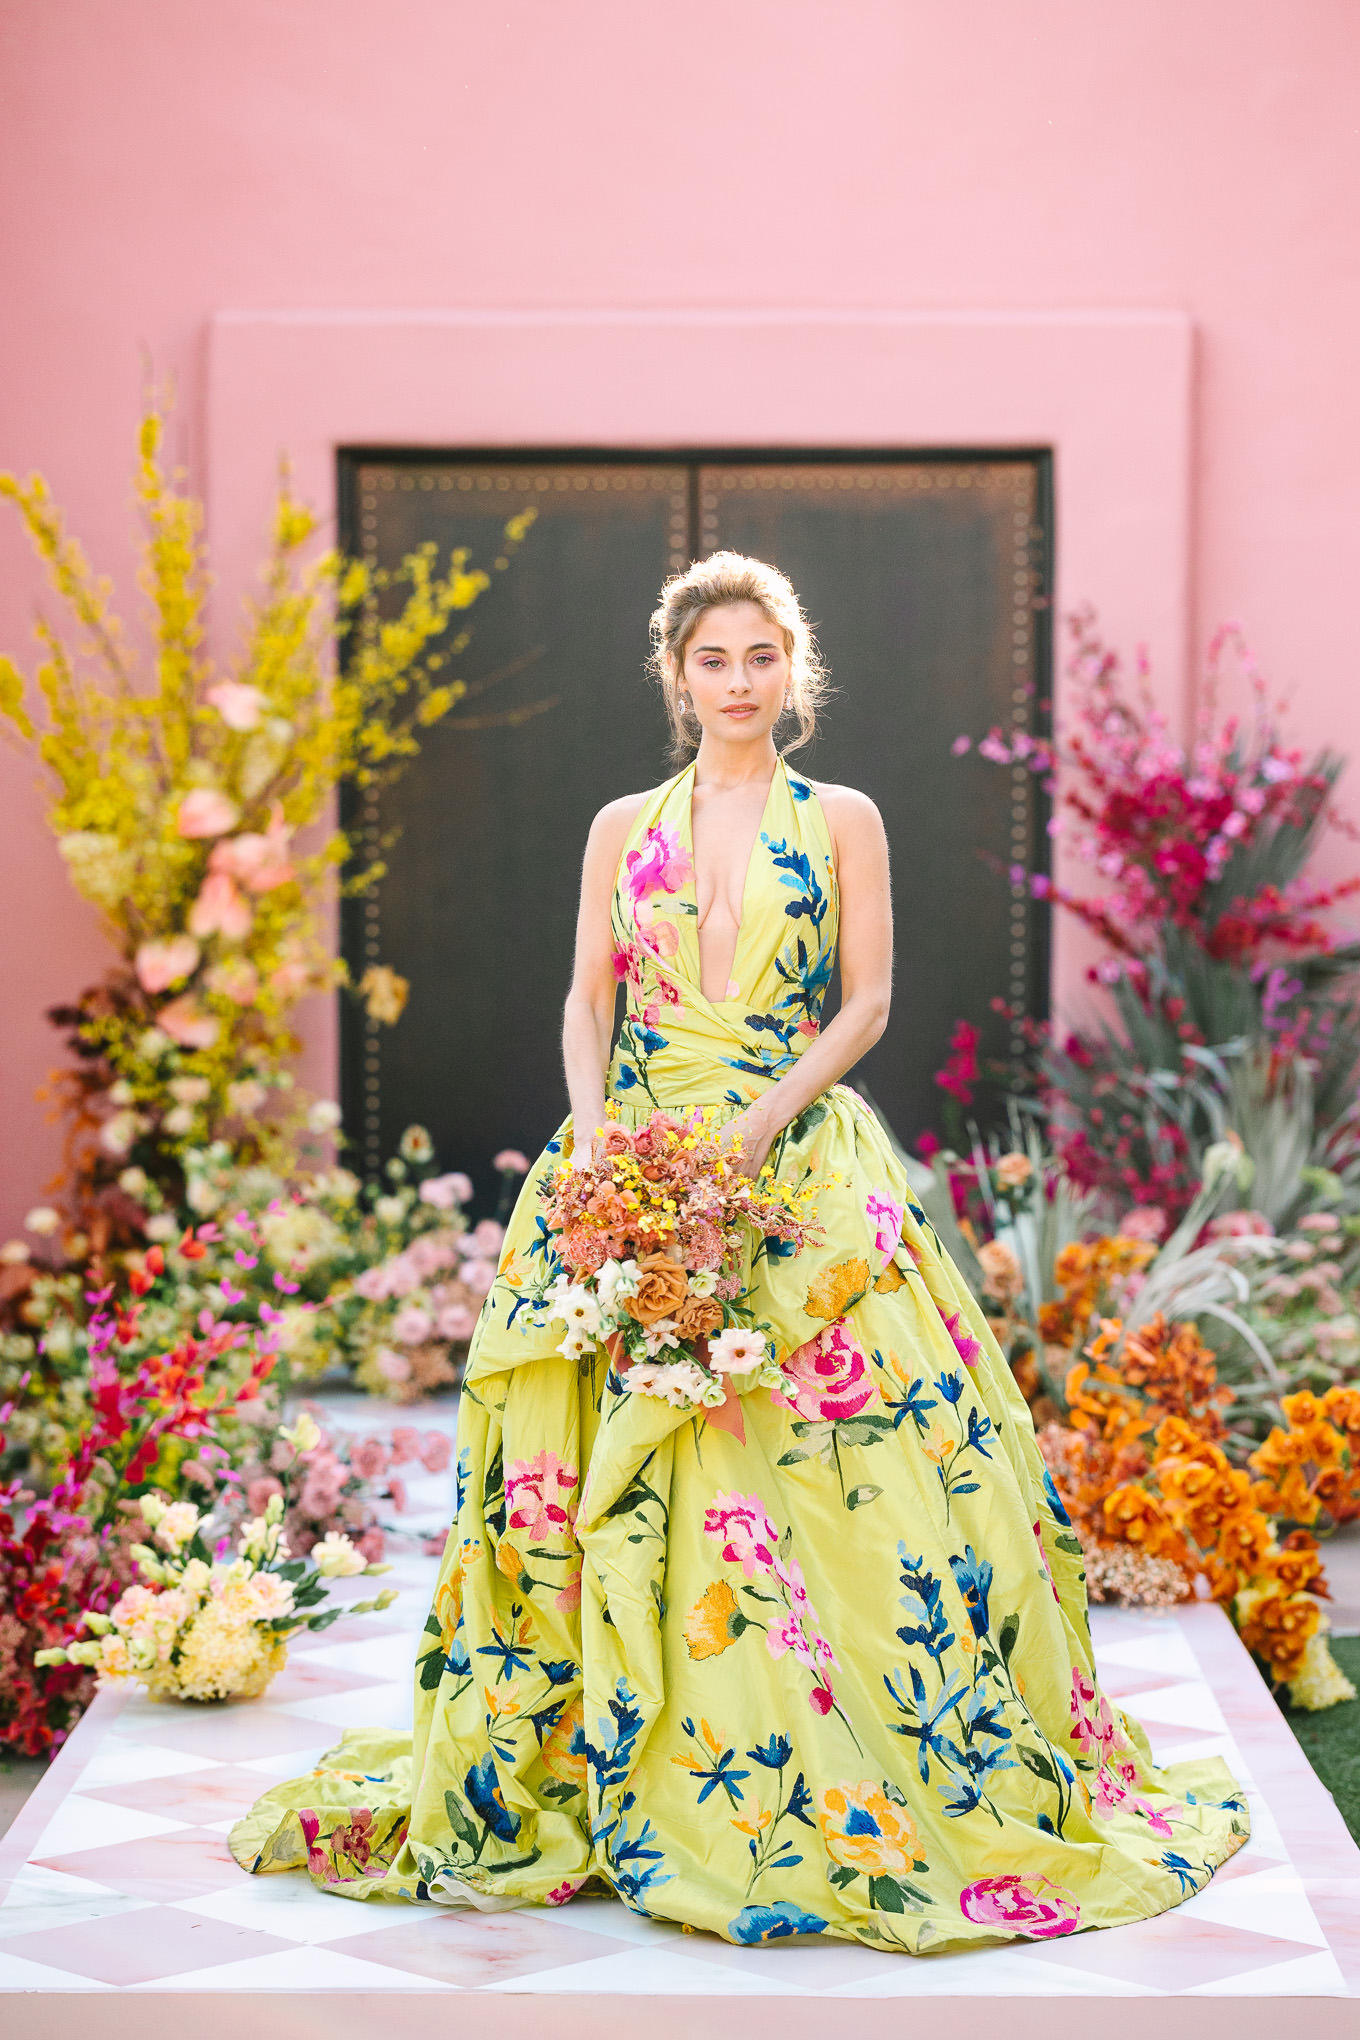 Chartreuse floral Marchesa gown on checkered runway | Kindred Presets x Mary Costa Photography Sands Hotel Ad Campaign | Colorful Palm Springs wedding photography | #palmspringsphotographer #lightroompresets #sandshotel #pinkhotel   Source: Mary Costa Photography | Los Angeles